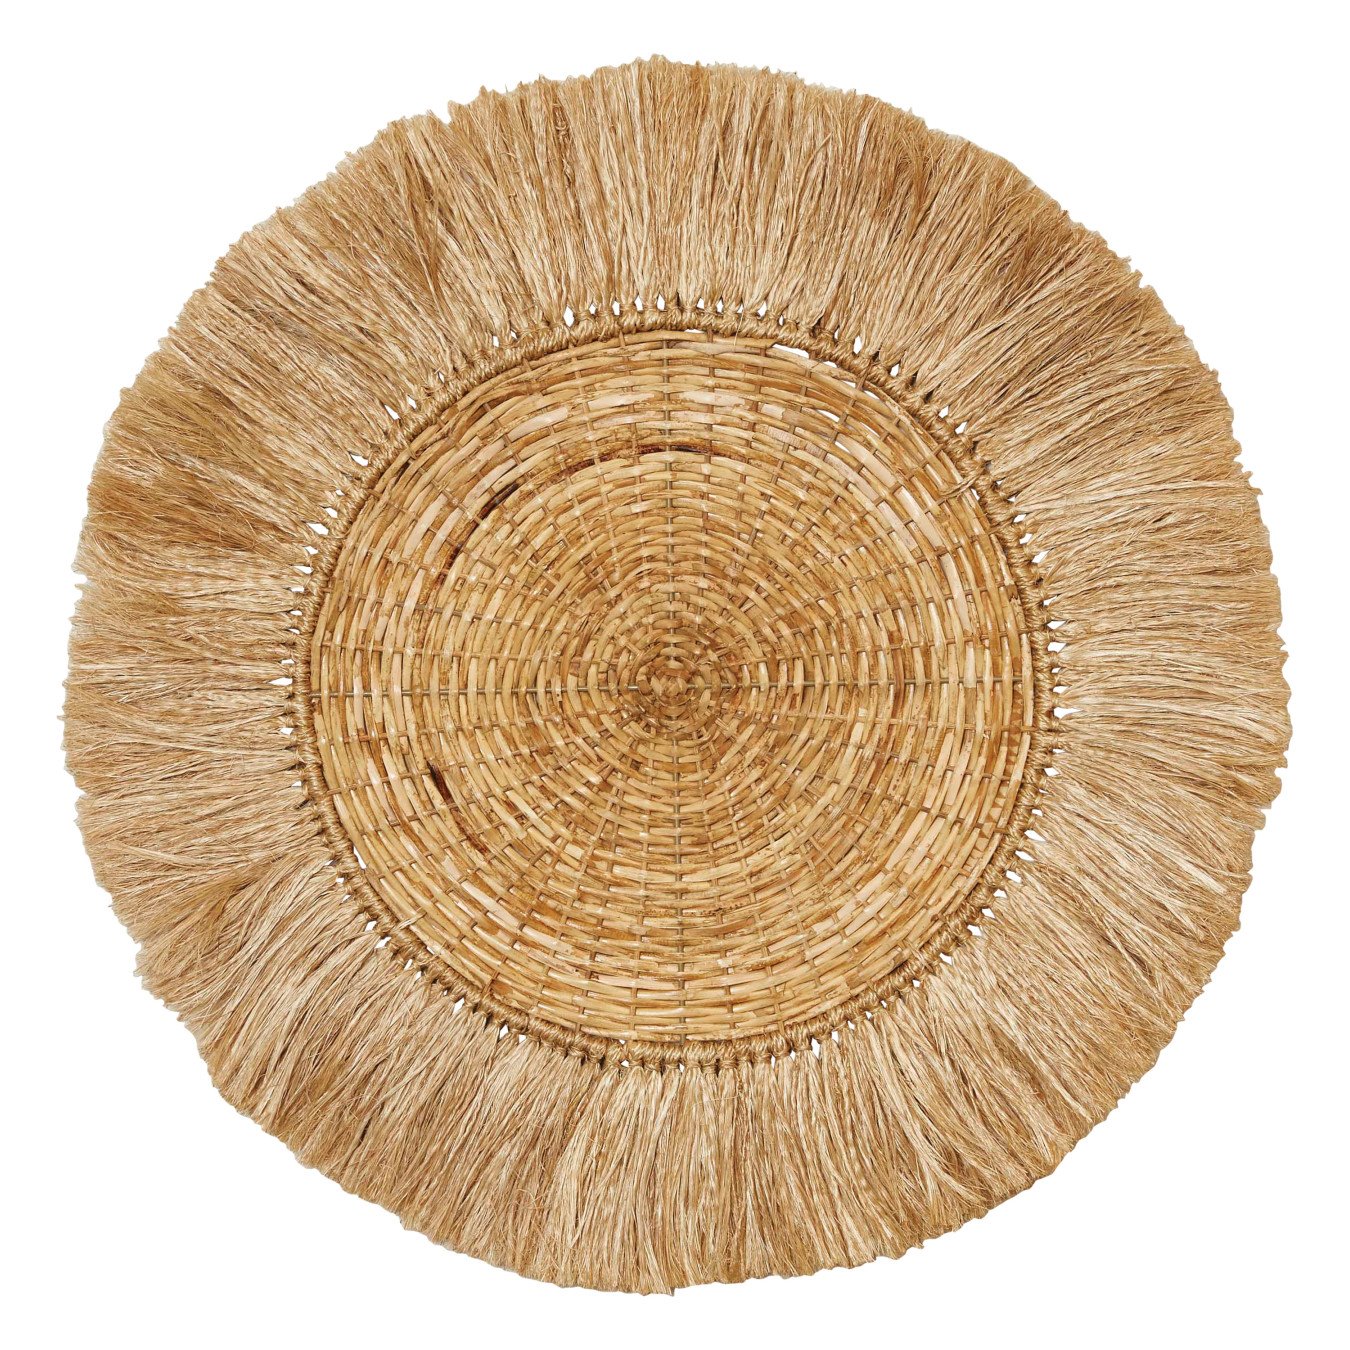 Handwoven 28" Round Rattan & Abaca Wall Décor with Fringe